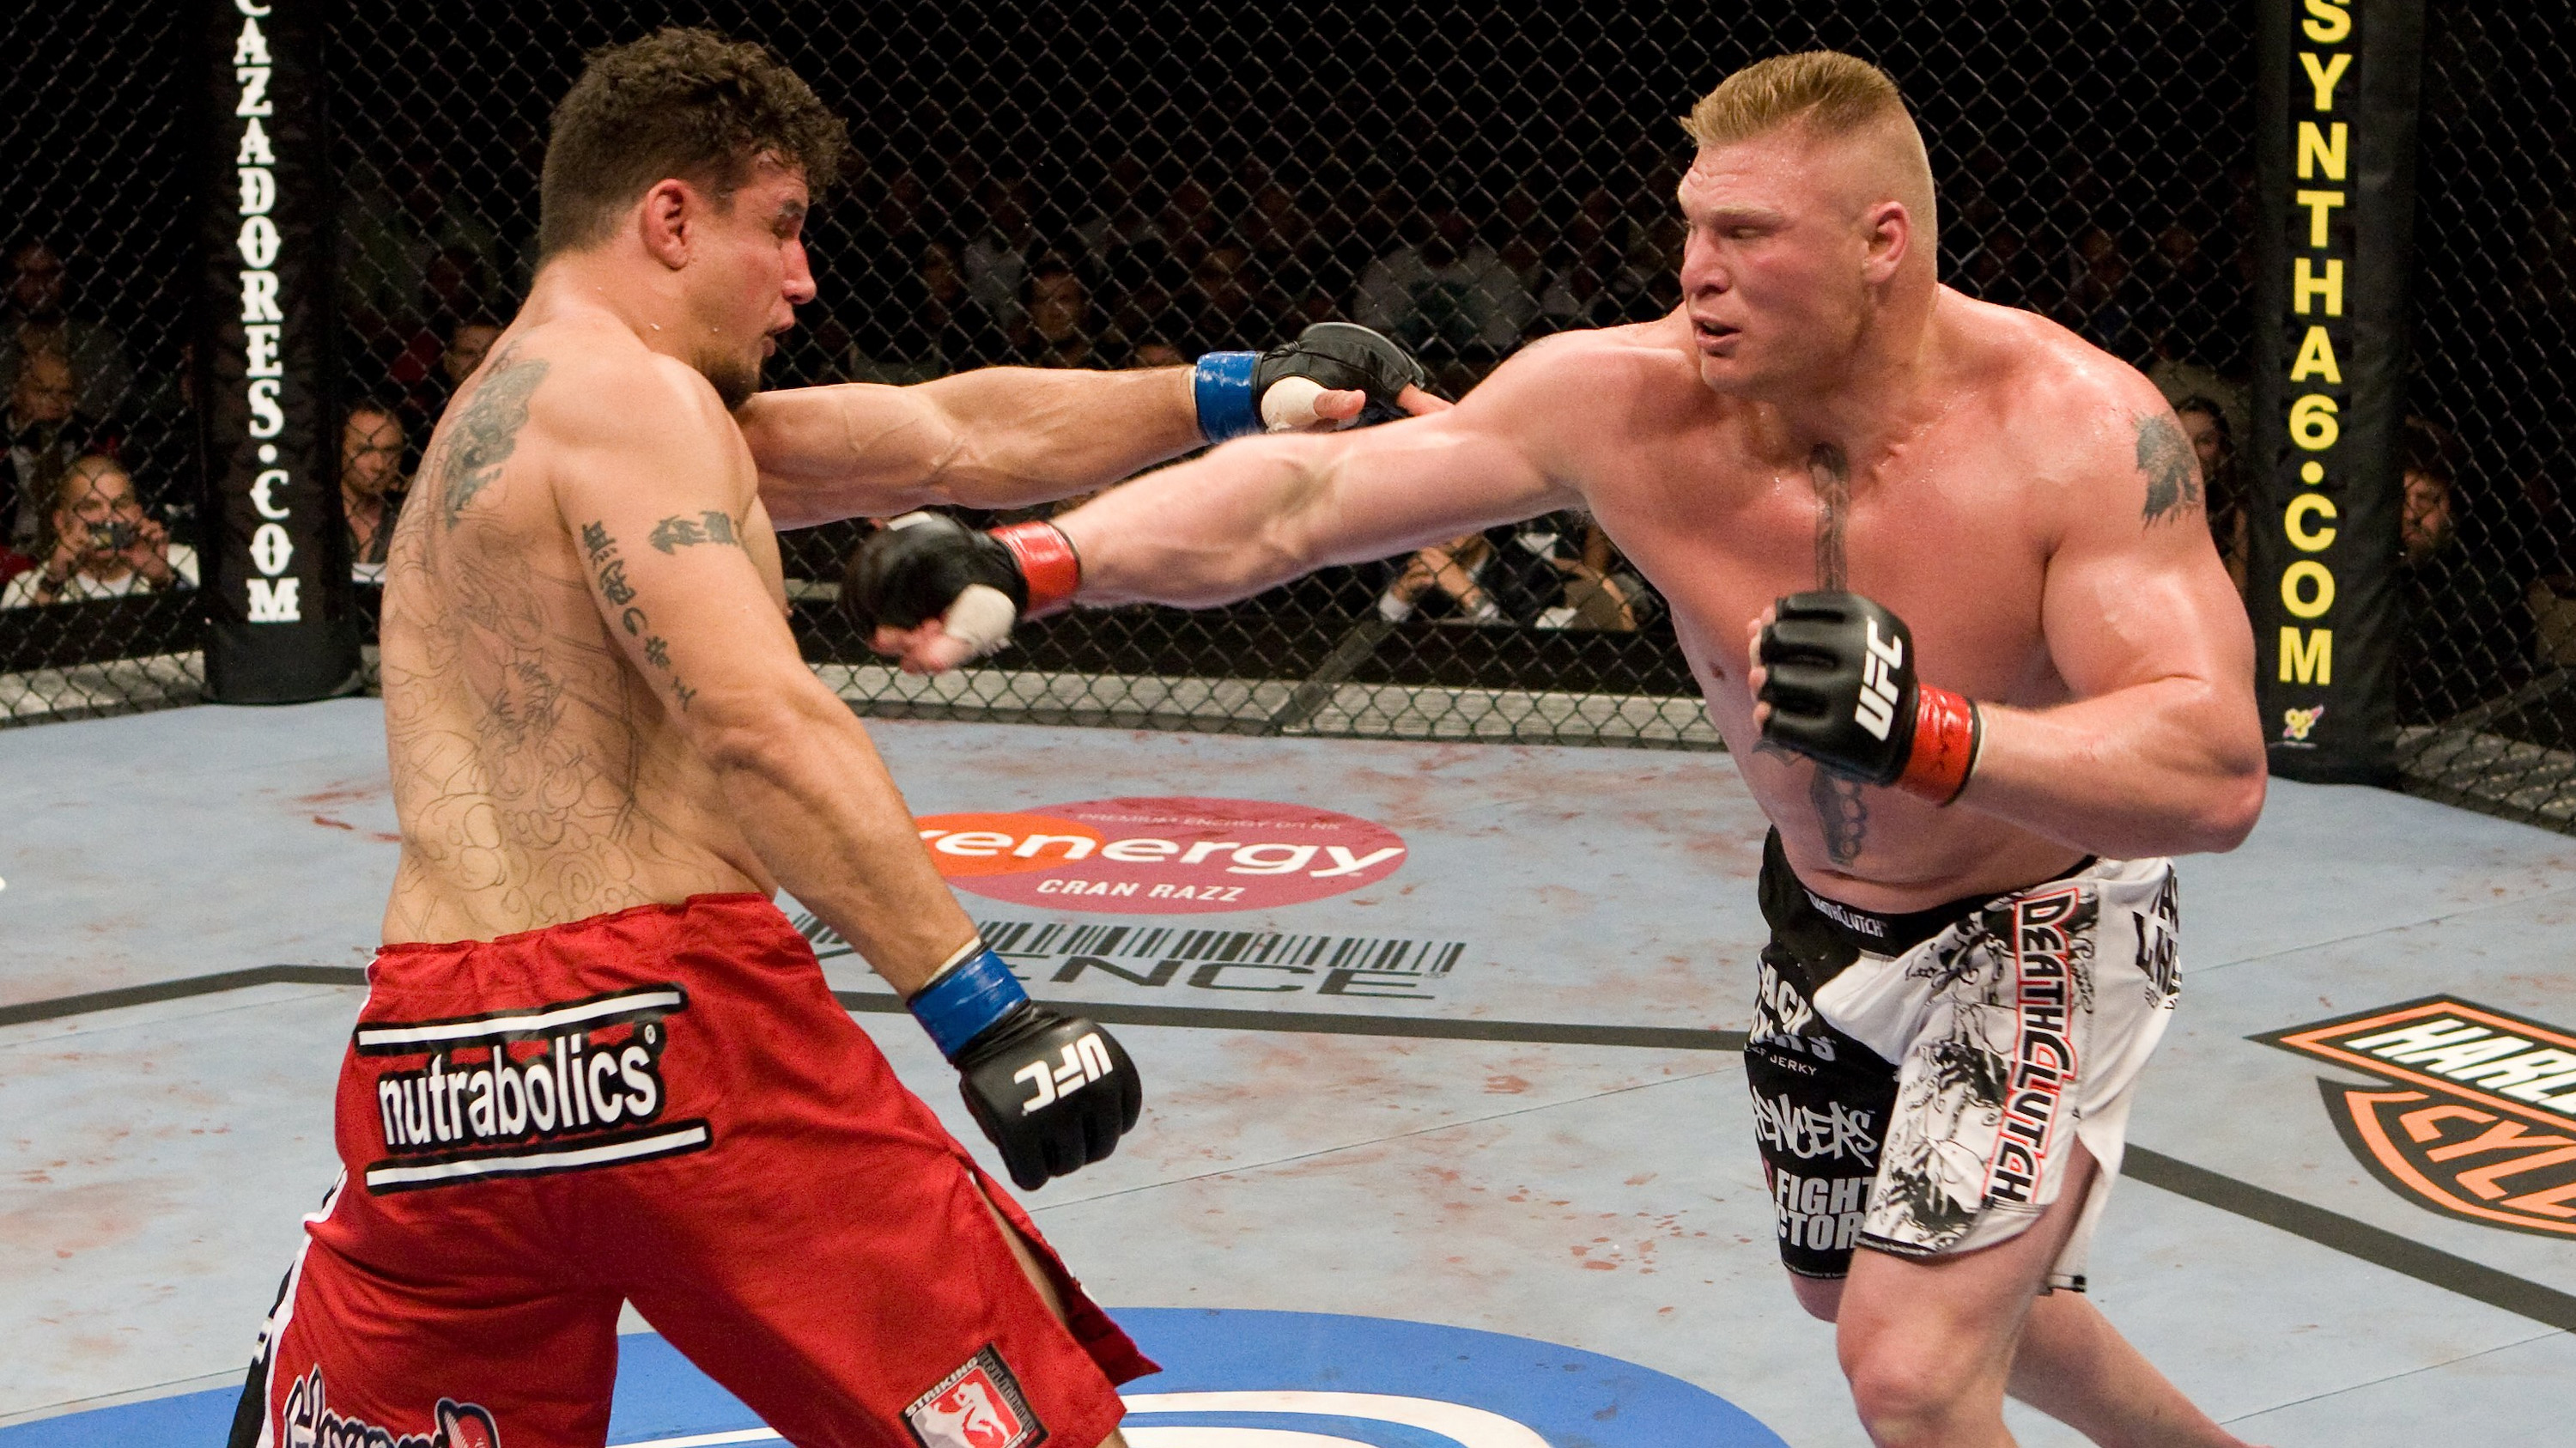 LAS VEGAS - JULY 11: Brock Lesnar (black/white shorts) def. Frank Mir (red shorts) - TKO - 1:48 round 2 during UFC 100 at Mandalay Bay Events Center on July 11, 2009 in Las Vegas, Nevada. (Photo by Josh Hedges/Zuffa LLC via Getty Images)